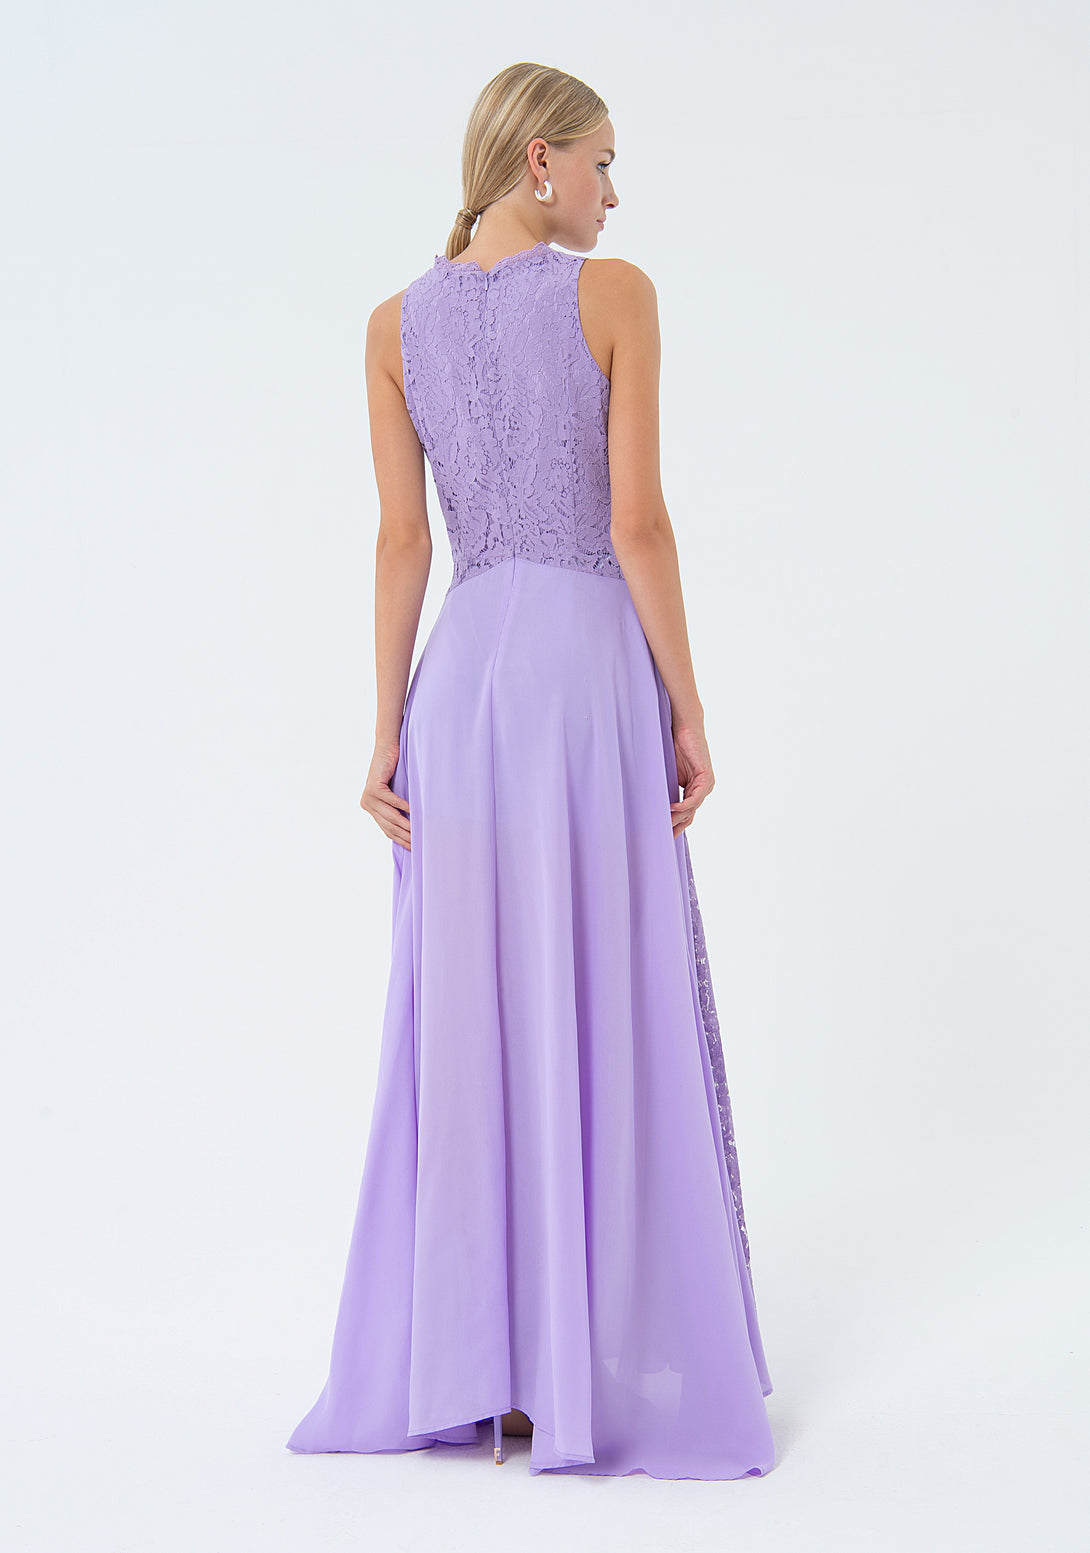 Long sleeveless dress with lace details Fracomina FQ24SD3008W412G1-185-4